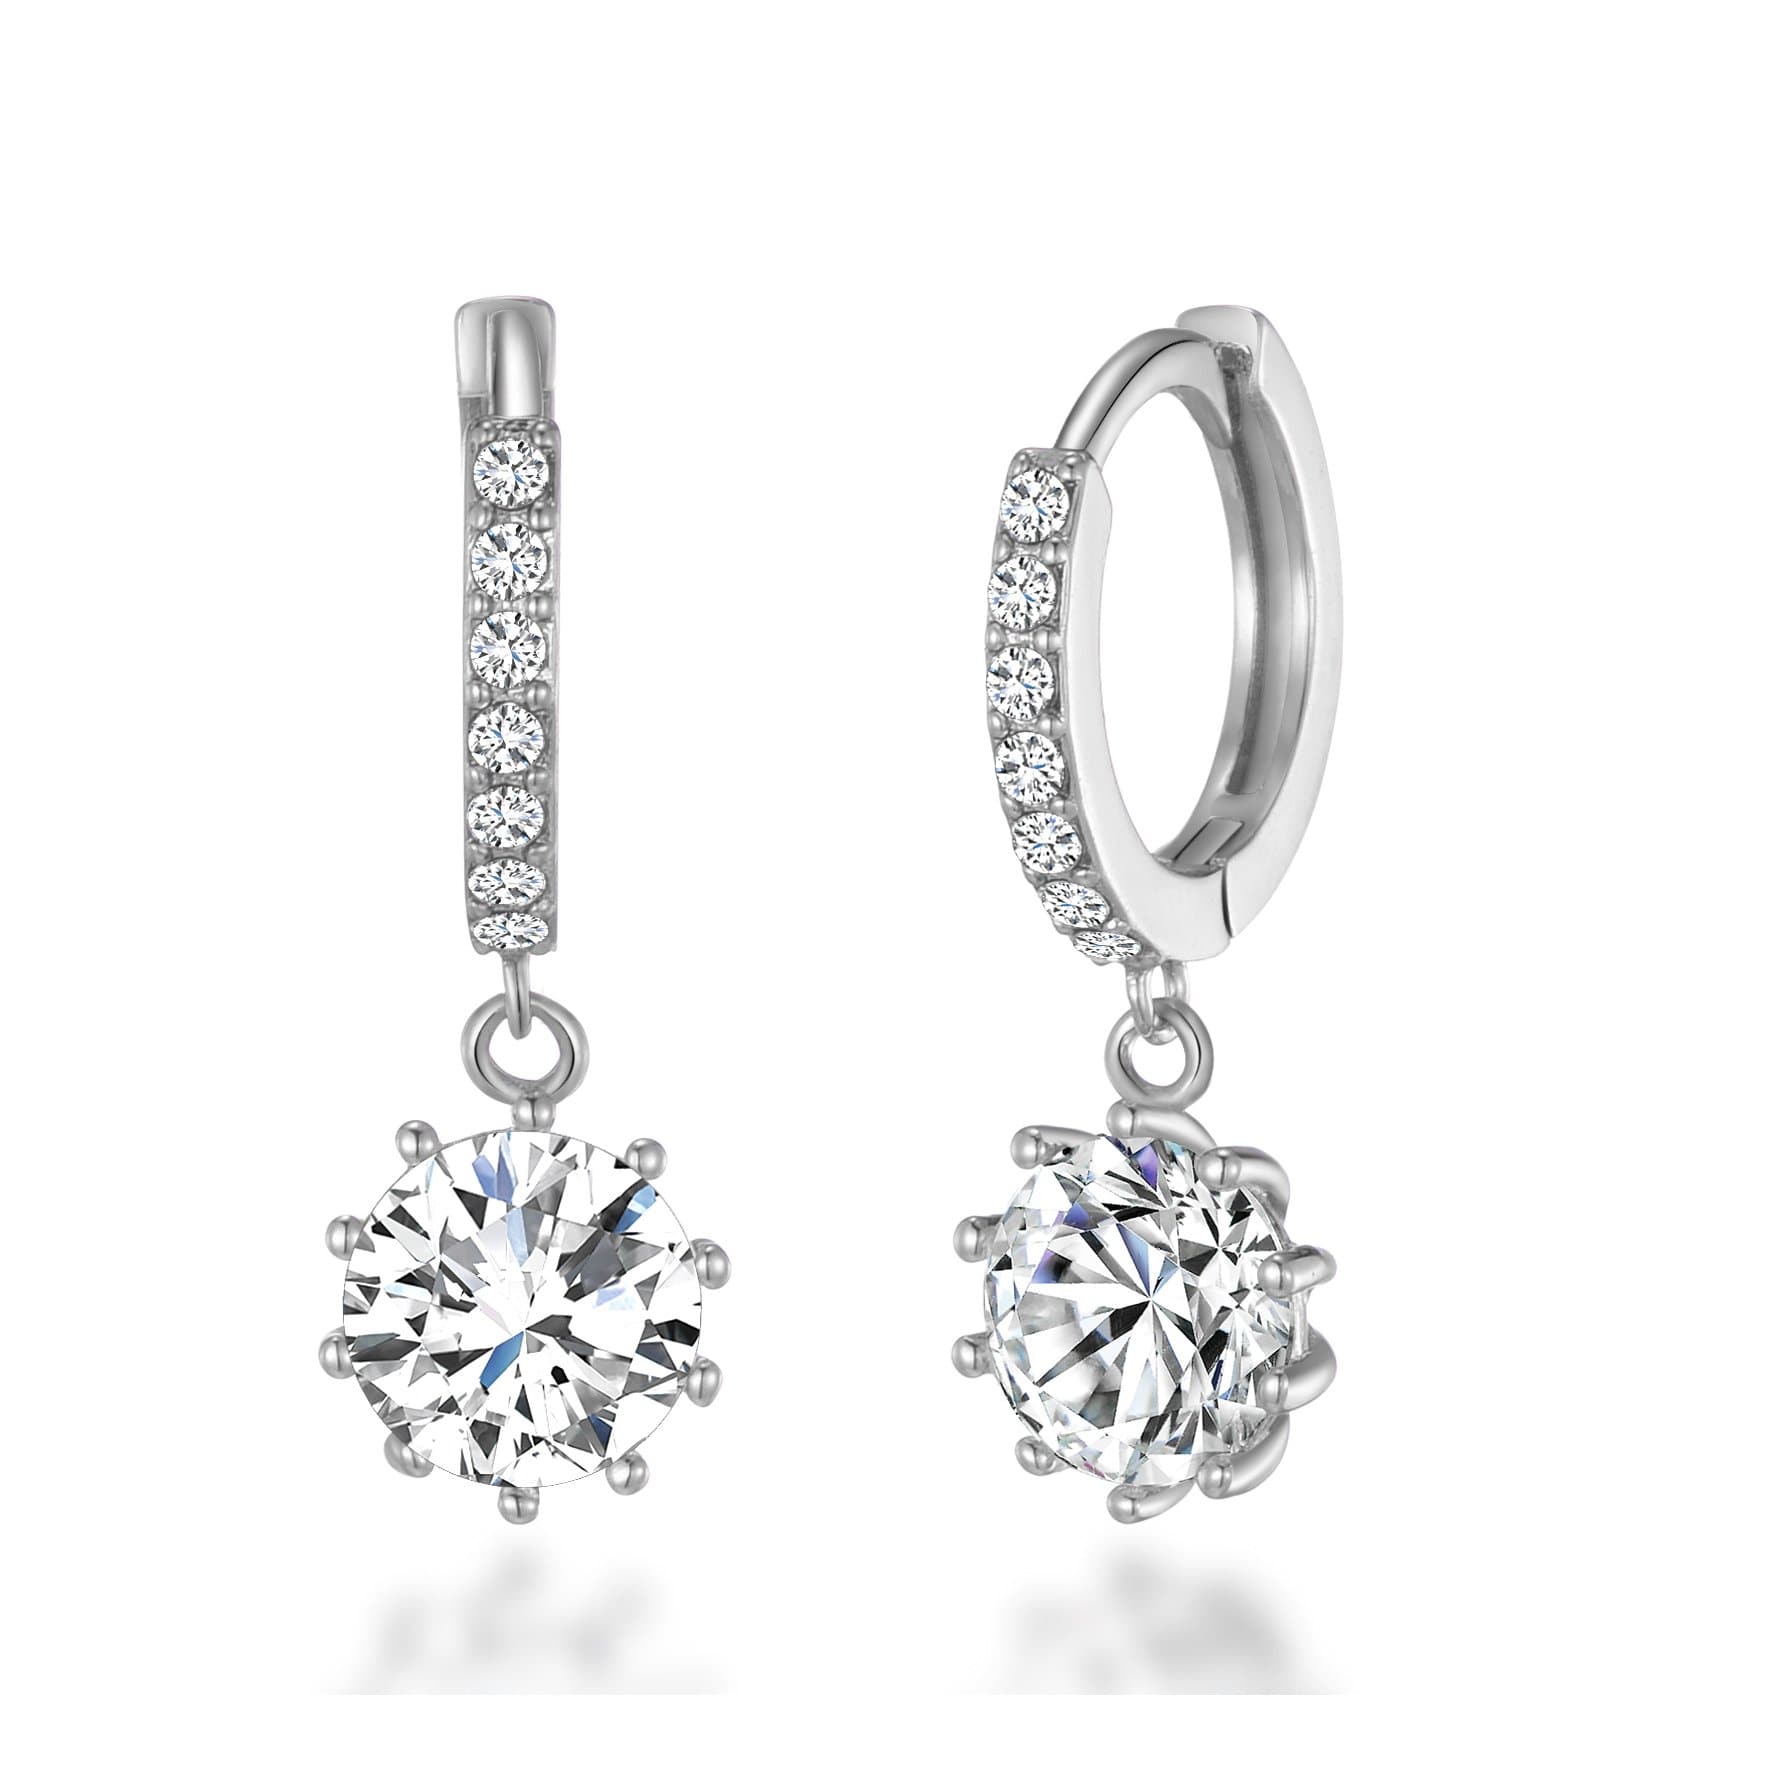 Silver Plated Solitaire Drop Hoop Earrings Created with Zircondia® Crystals